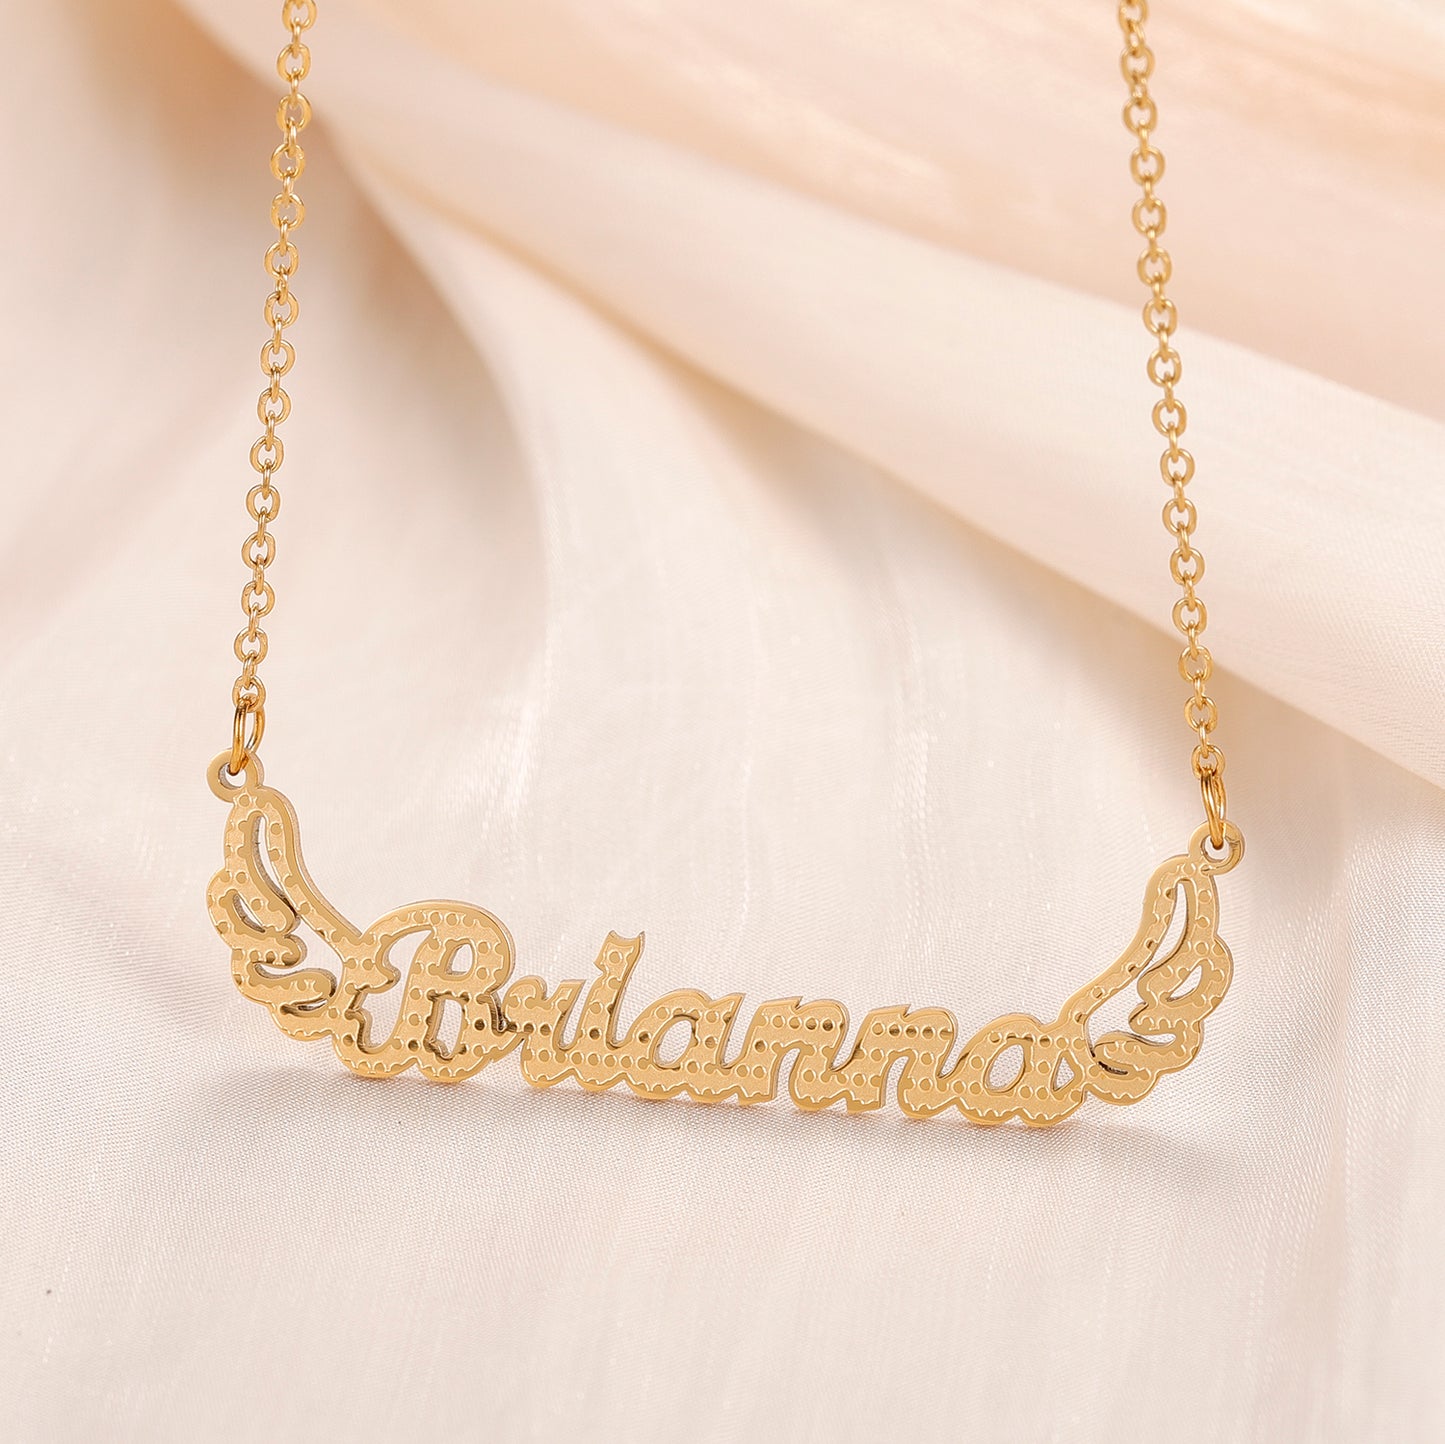 Personalised Bespoke Girls Single Name Necklace - (2years till 14 years)  - Mini me, Kids, Toddler, Teenager Angel Jewellery in Arabic English - Gifts Eid Birthday  - FAIRY